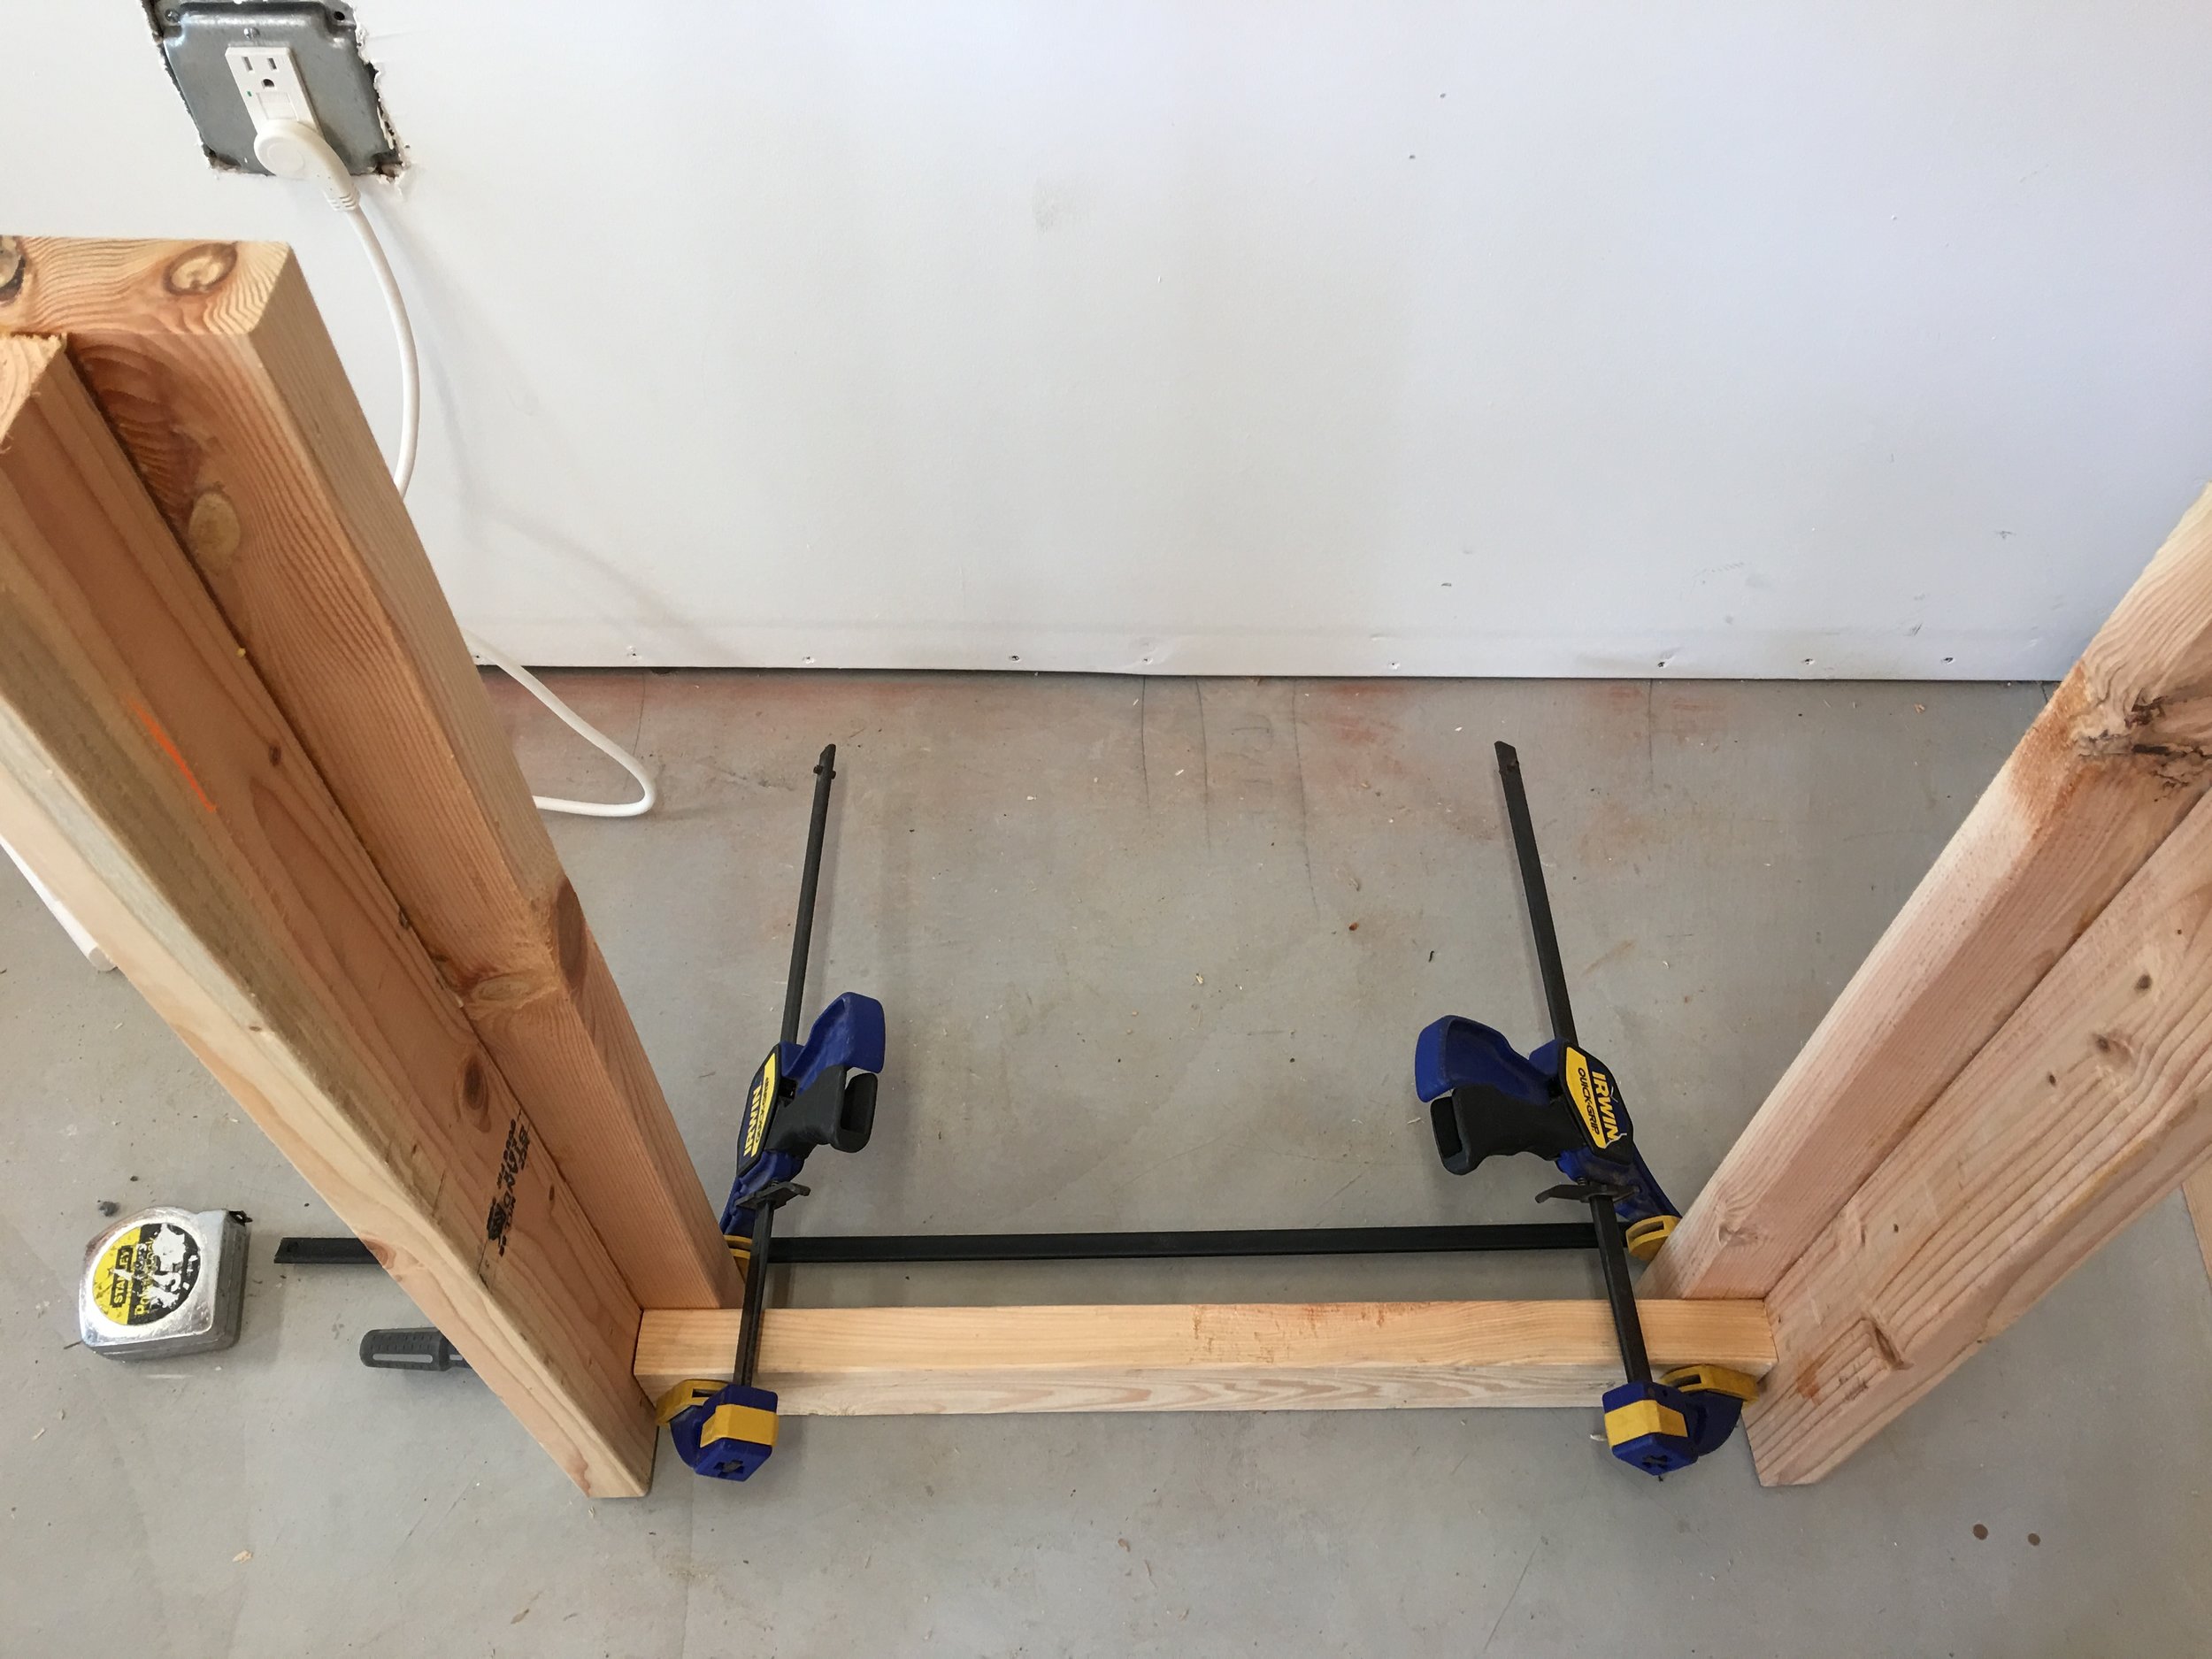  Use clamps to square up legs and cross members when screwing together. 